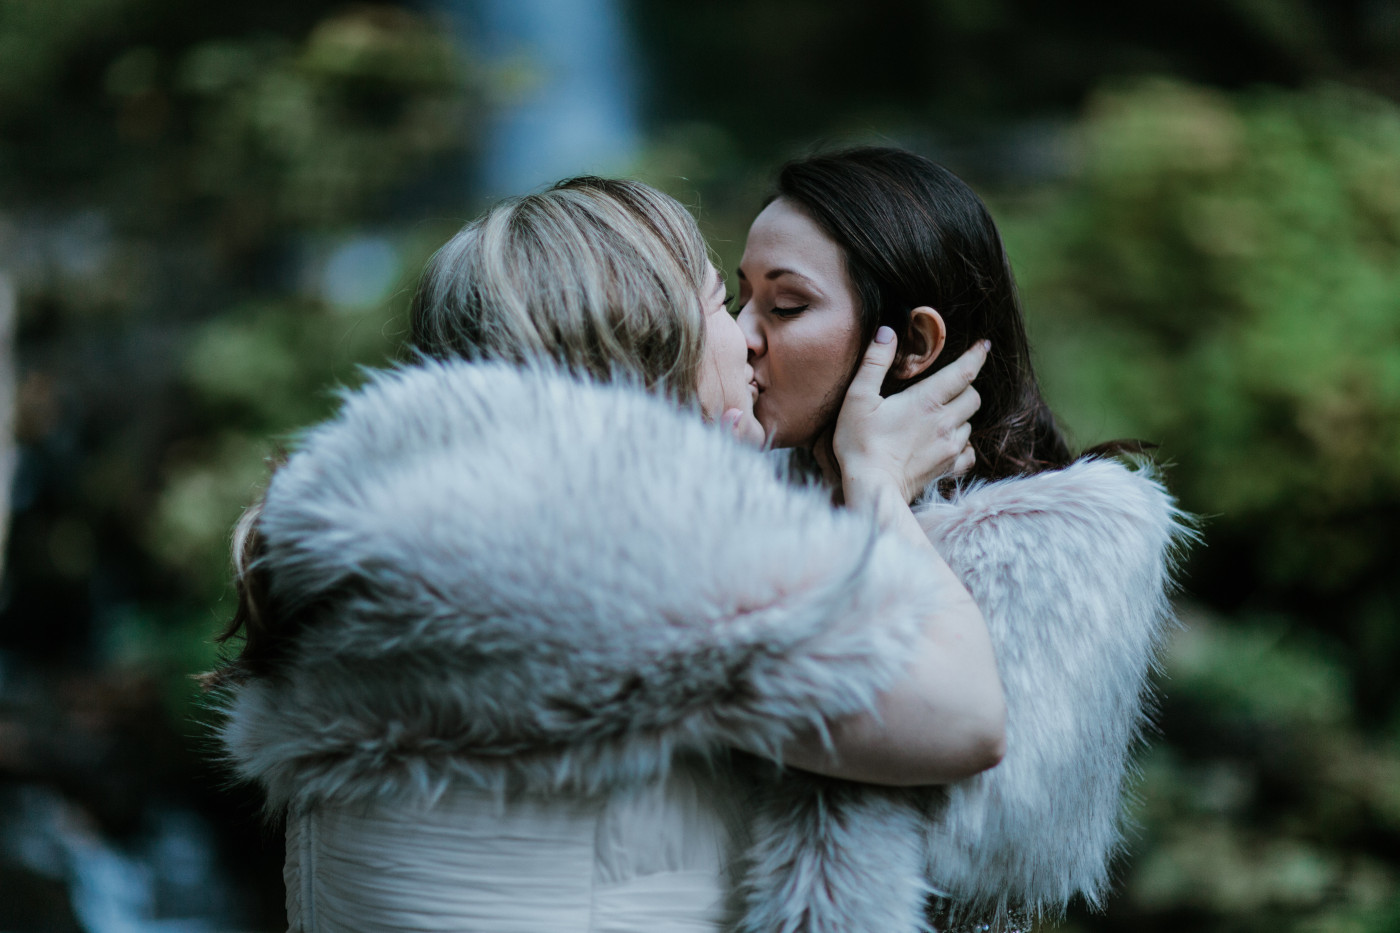 Tiffany and Hayley seal their elopement with a kiss. Elopement photography at the Columbia River Gorge by Sienna Plus Josh.